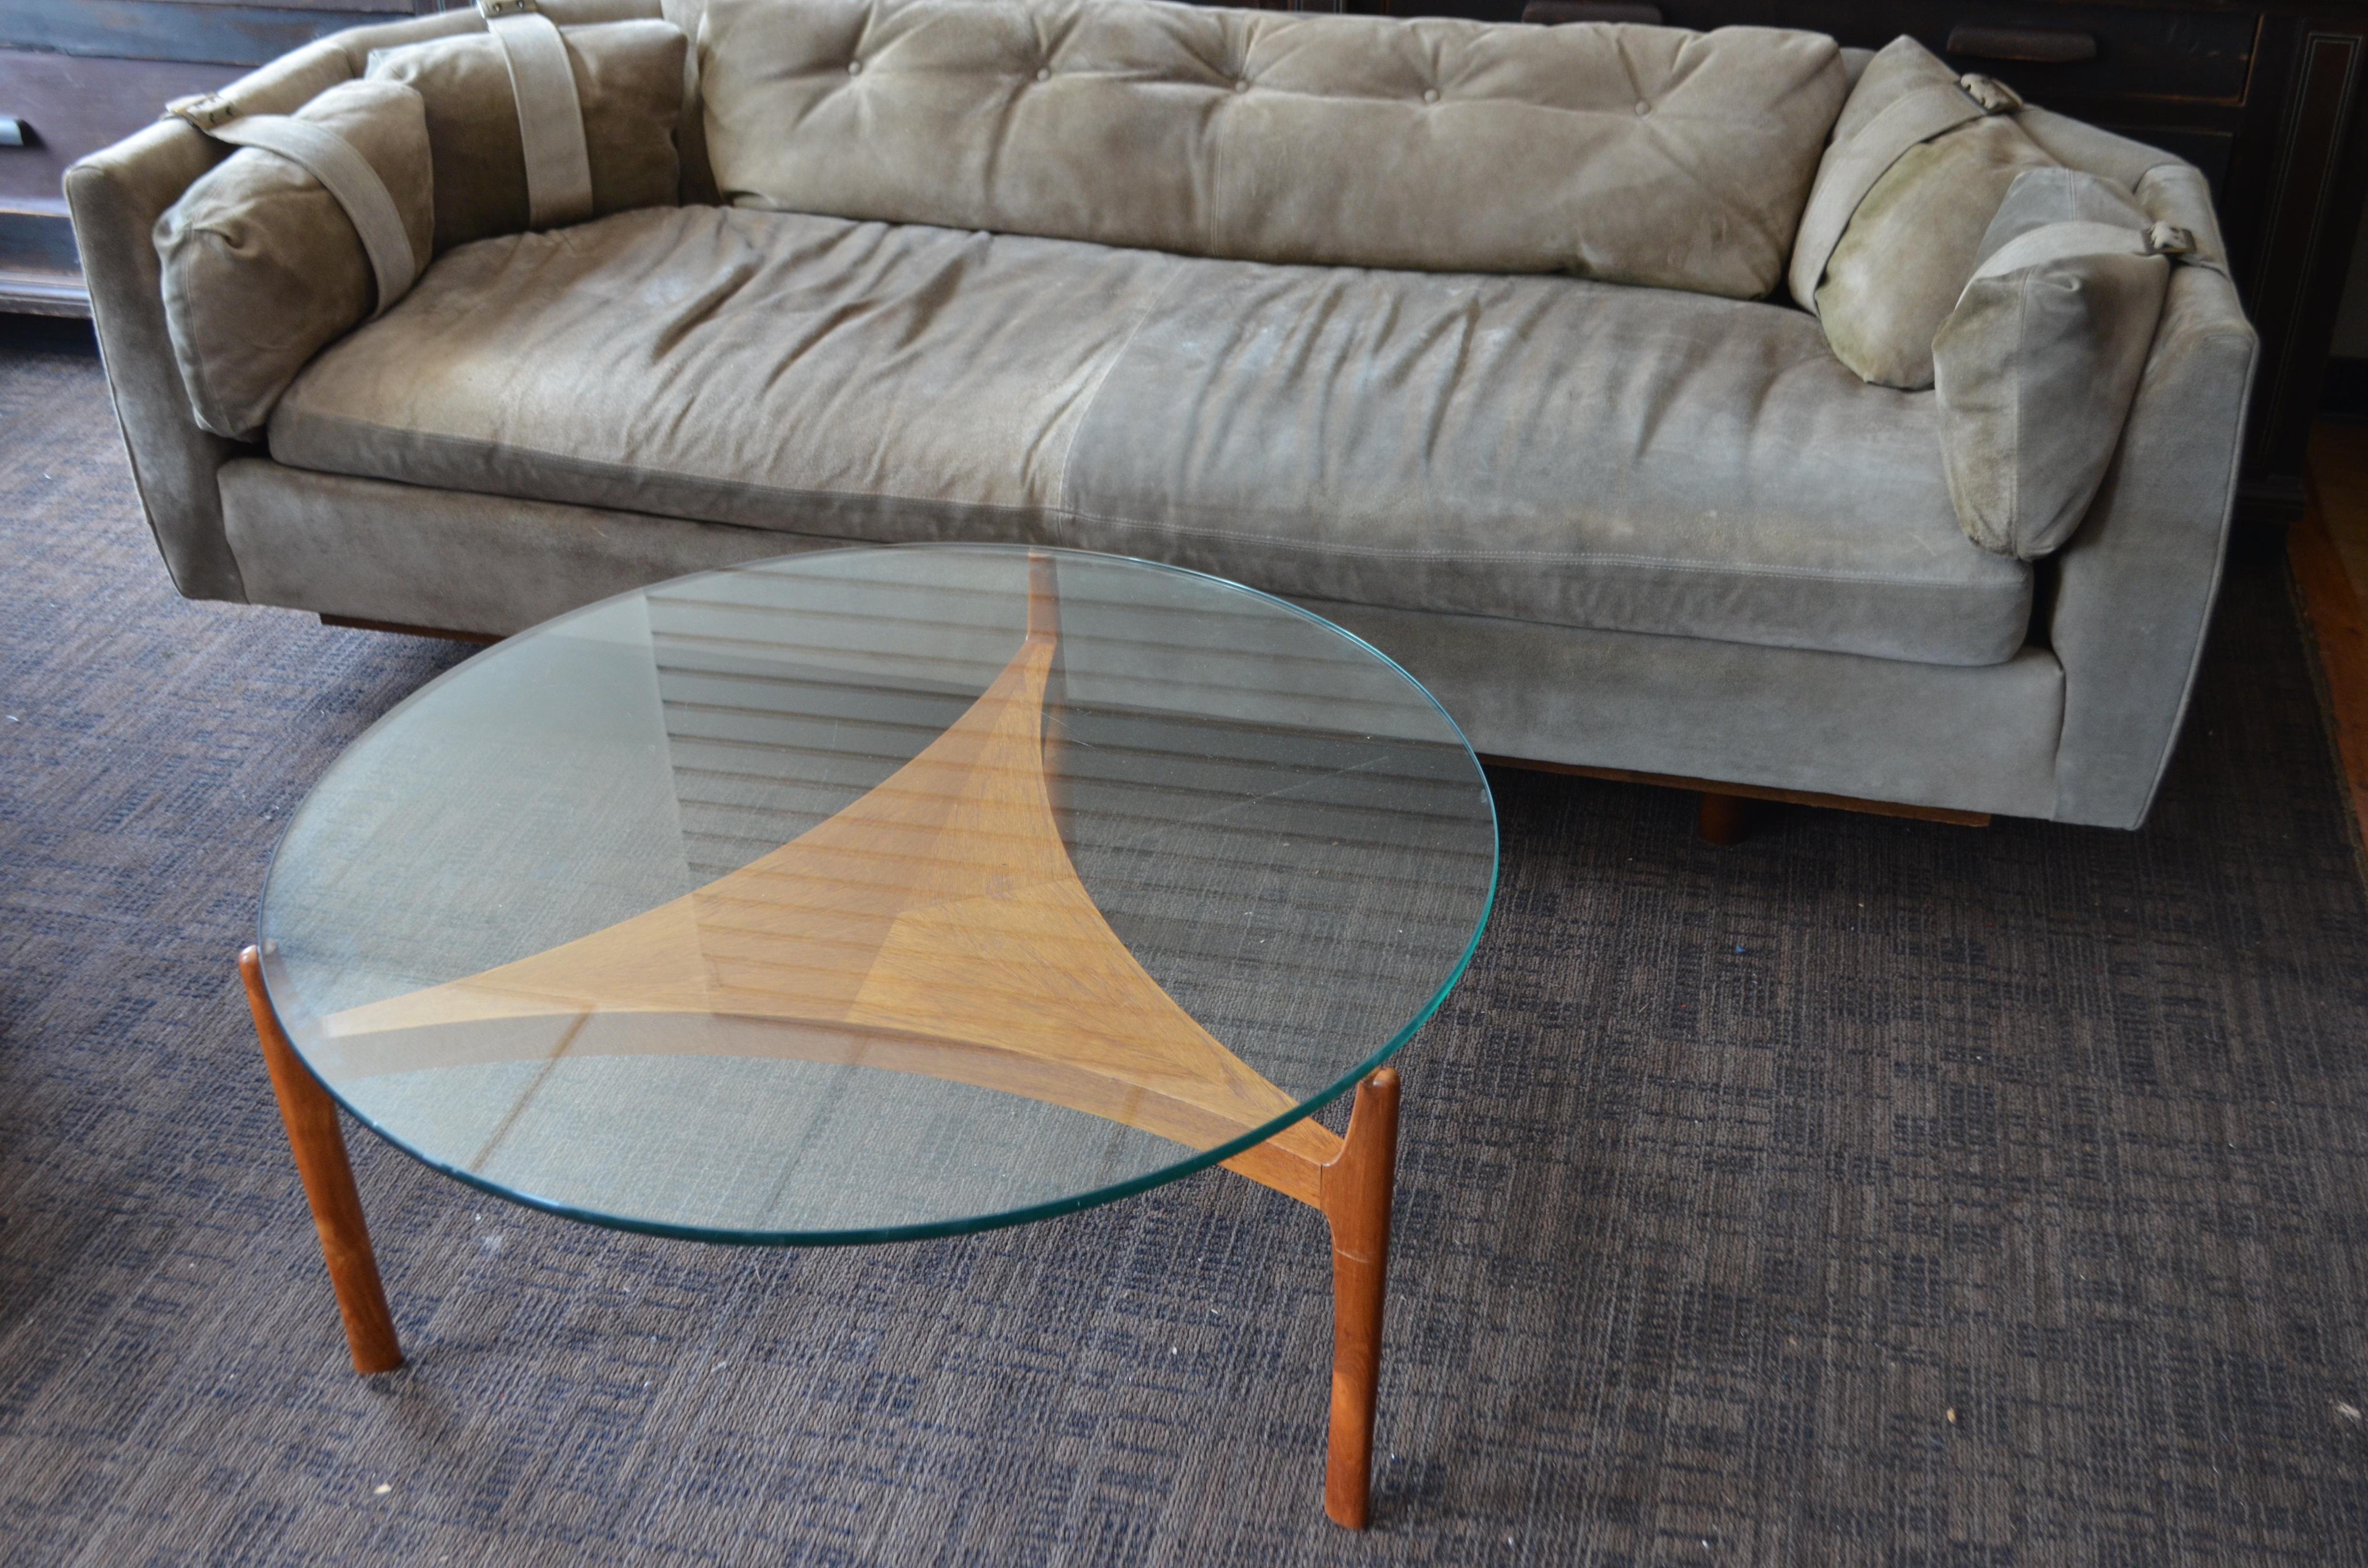 20th Century Midcentury Coffee Table with Teak Base and Glass Top Designed by Sven Ellekaer For Sale